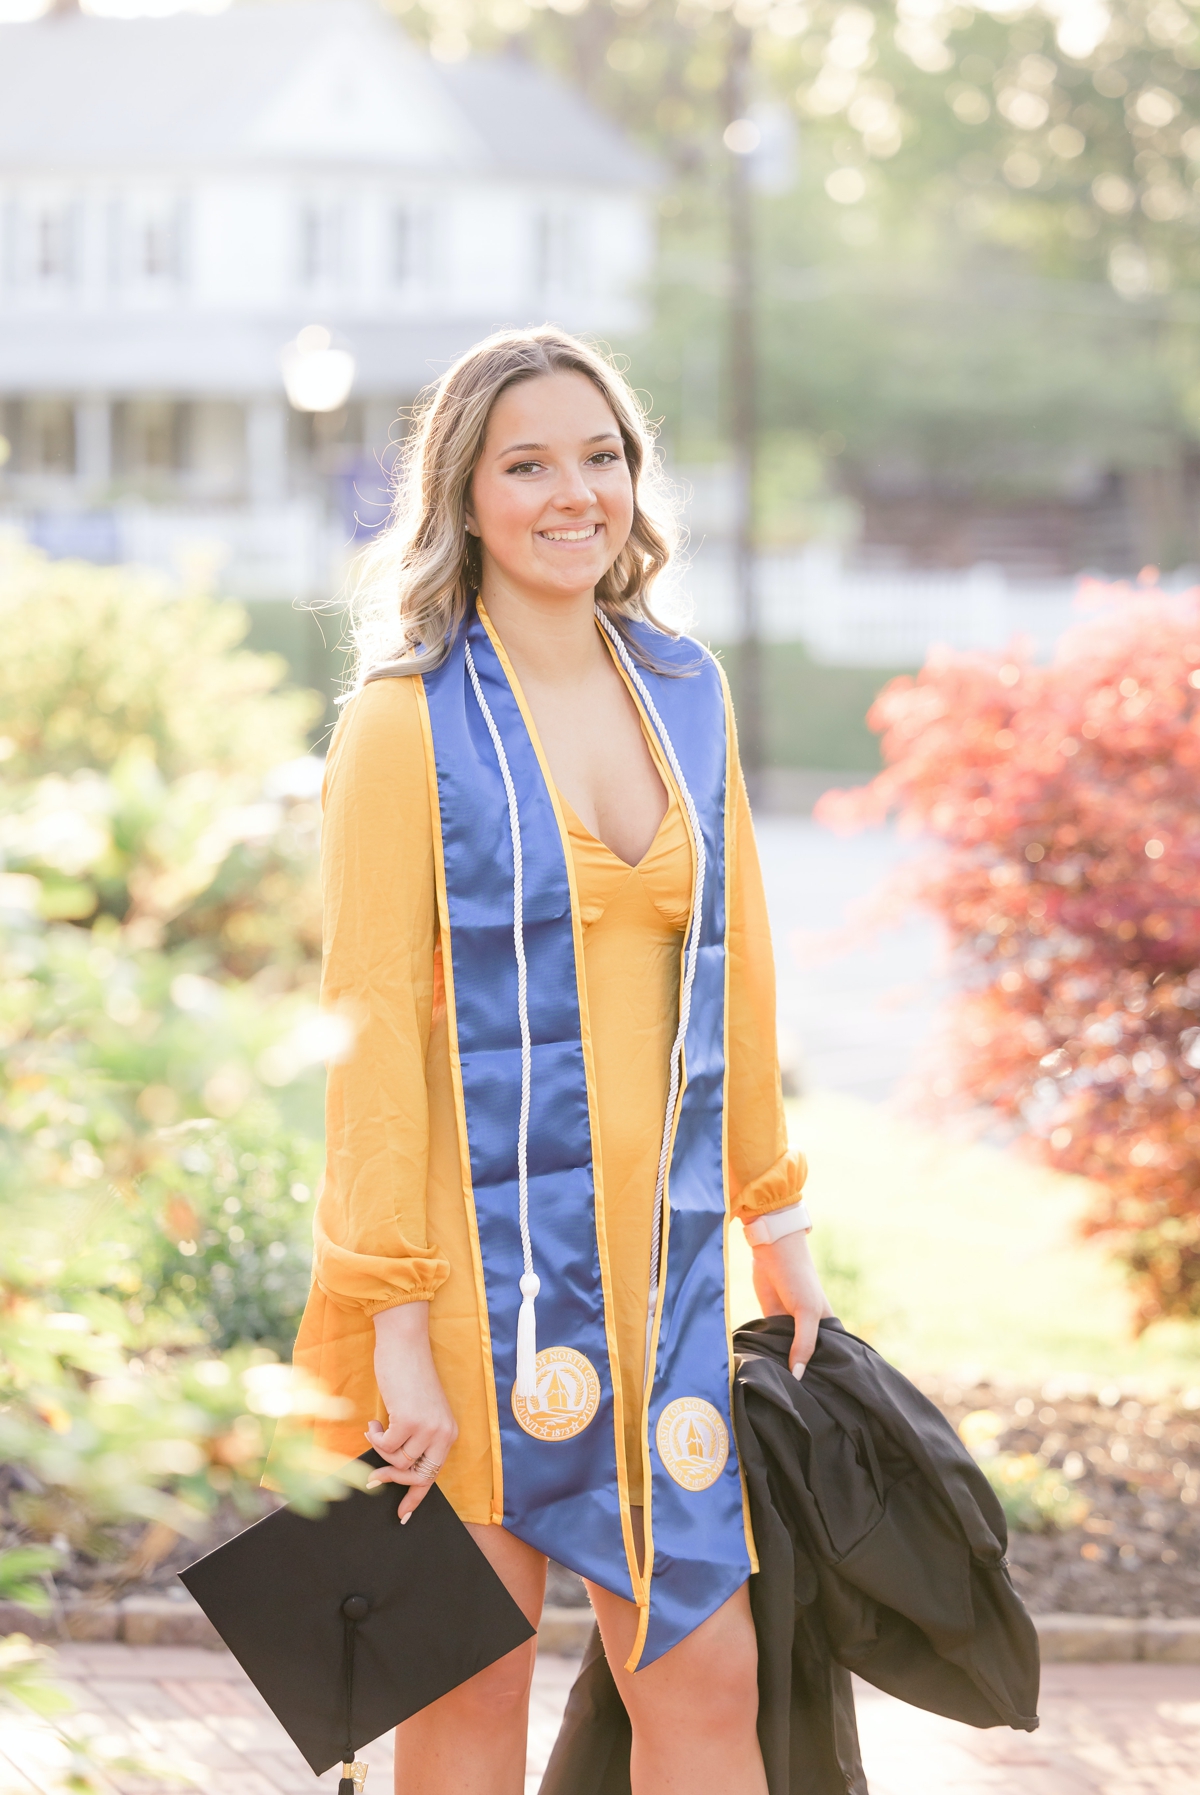 UNG graduate in a yellow dress wearing her graduation stole and cords while holding her cap in a garden on campus.